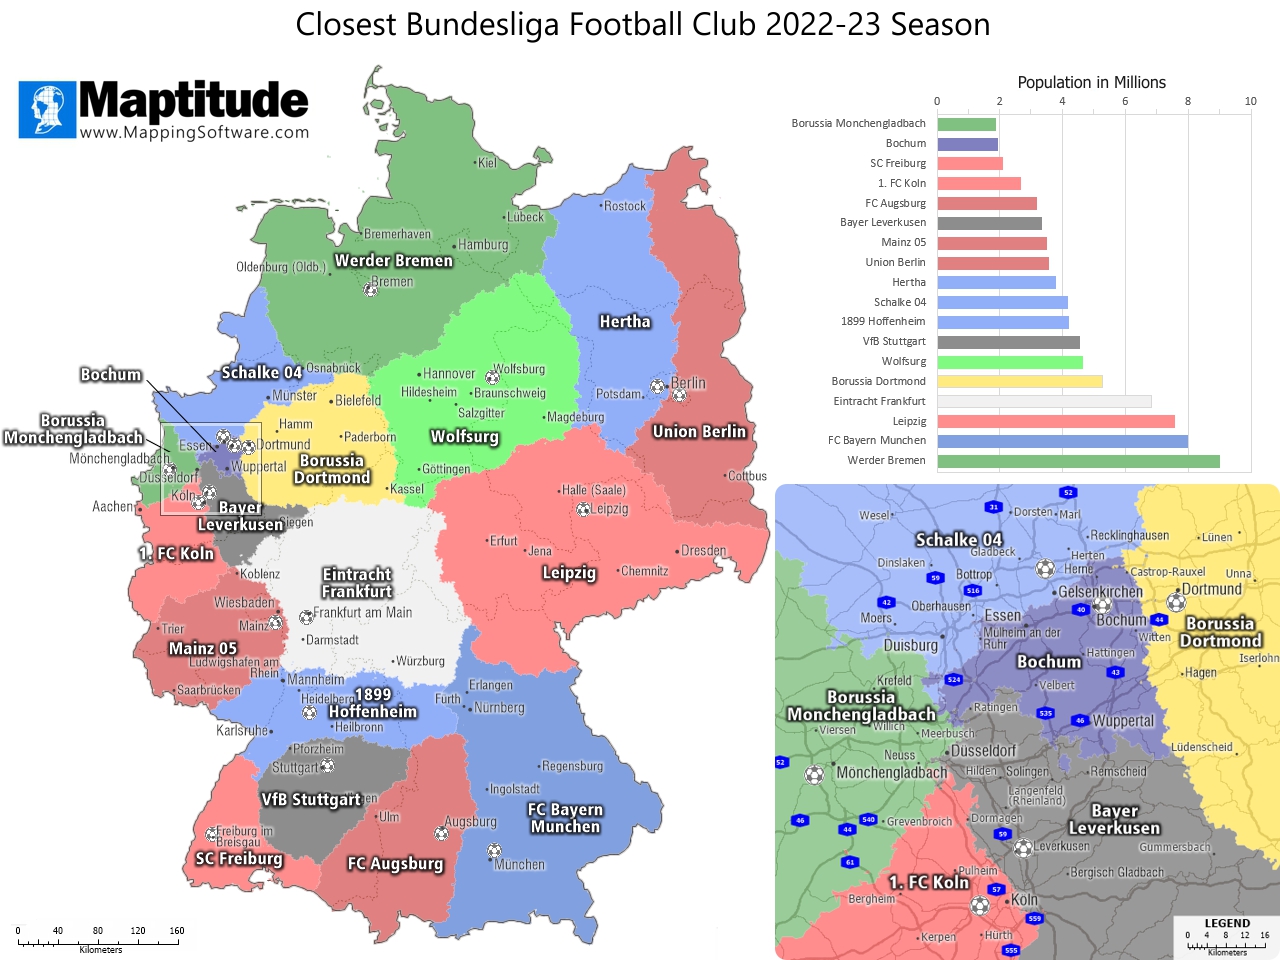 Maptitude mapping software infographic of Closest Bundesliga Football Club